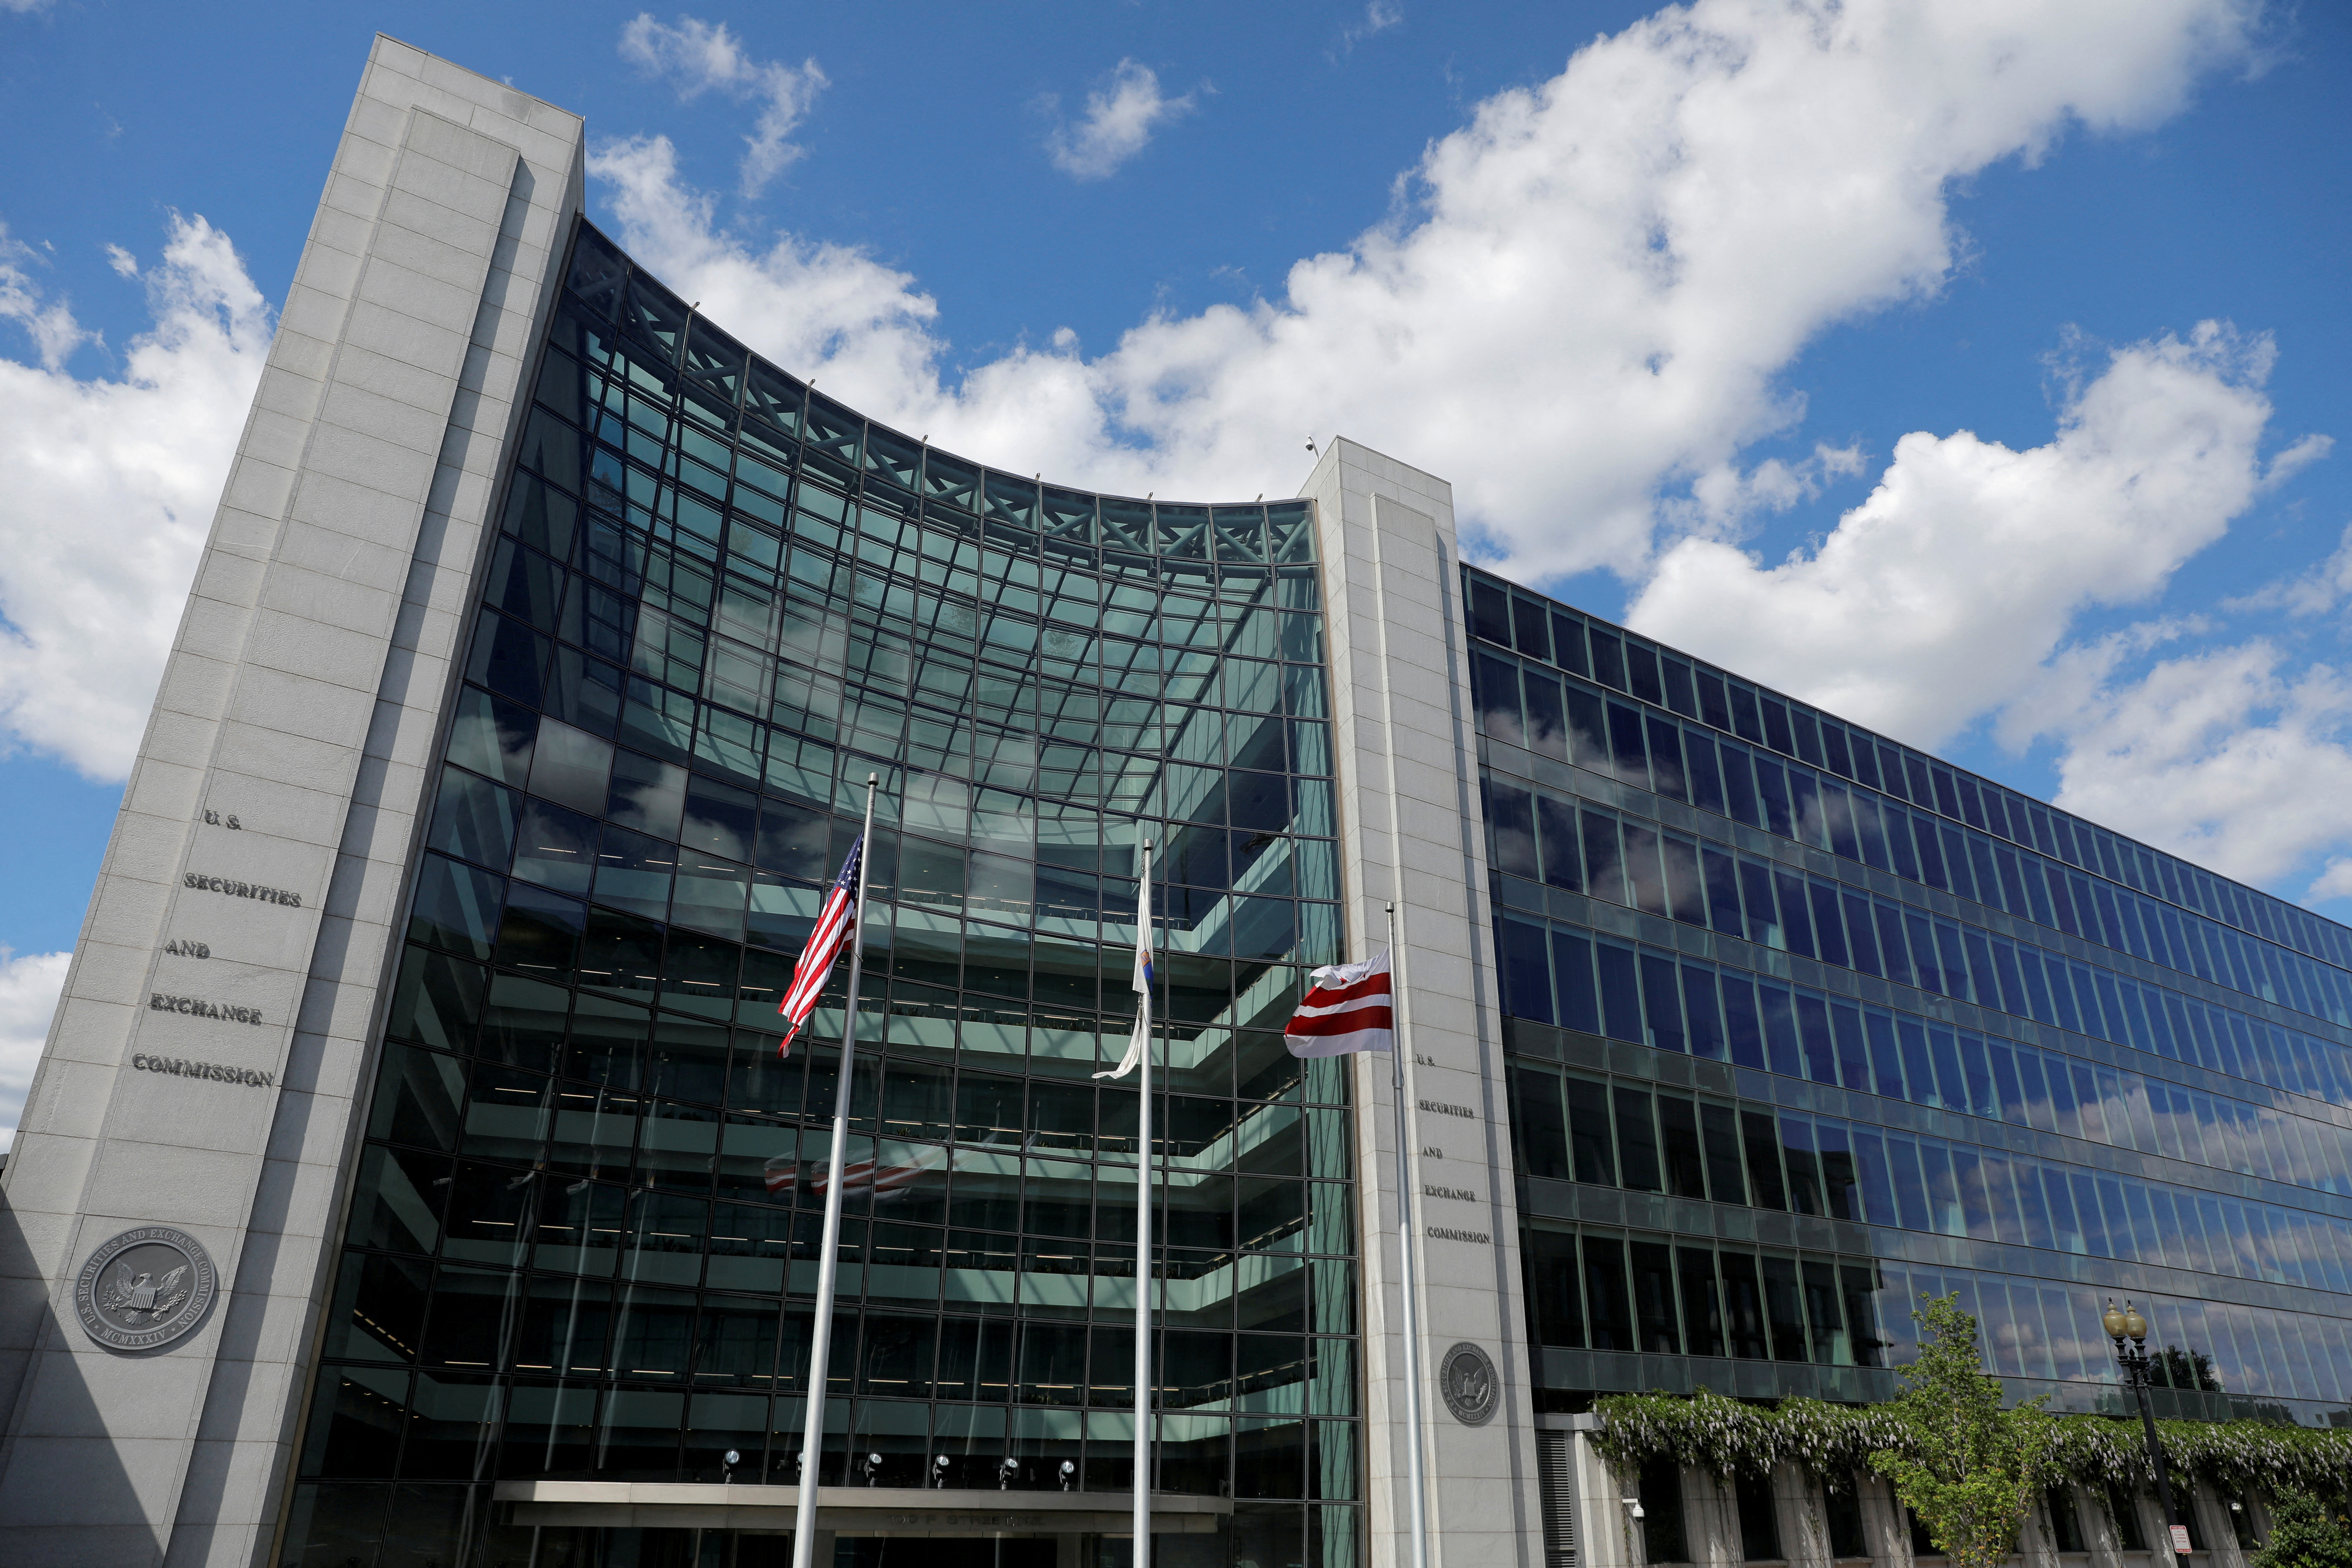 The headquarters of the U.S. Securities and Exchange Commission (SEC) is seen in Washington, D.C.